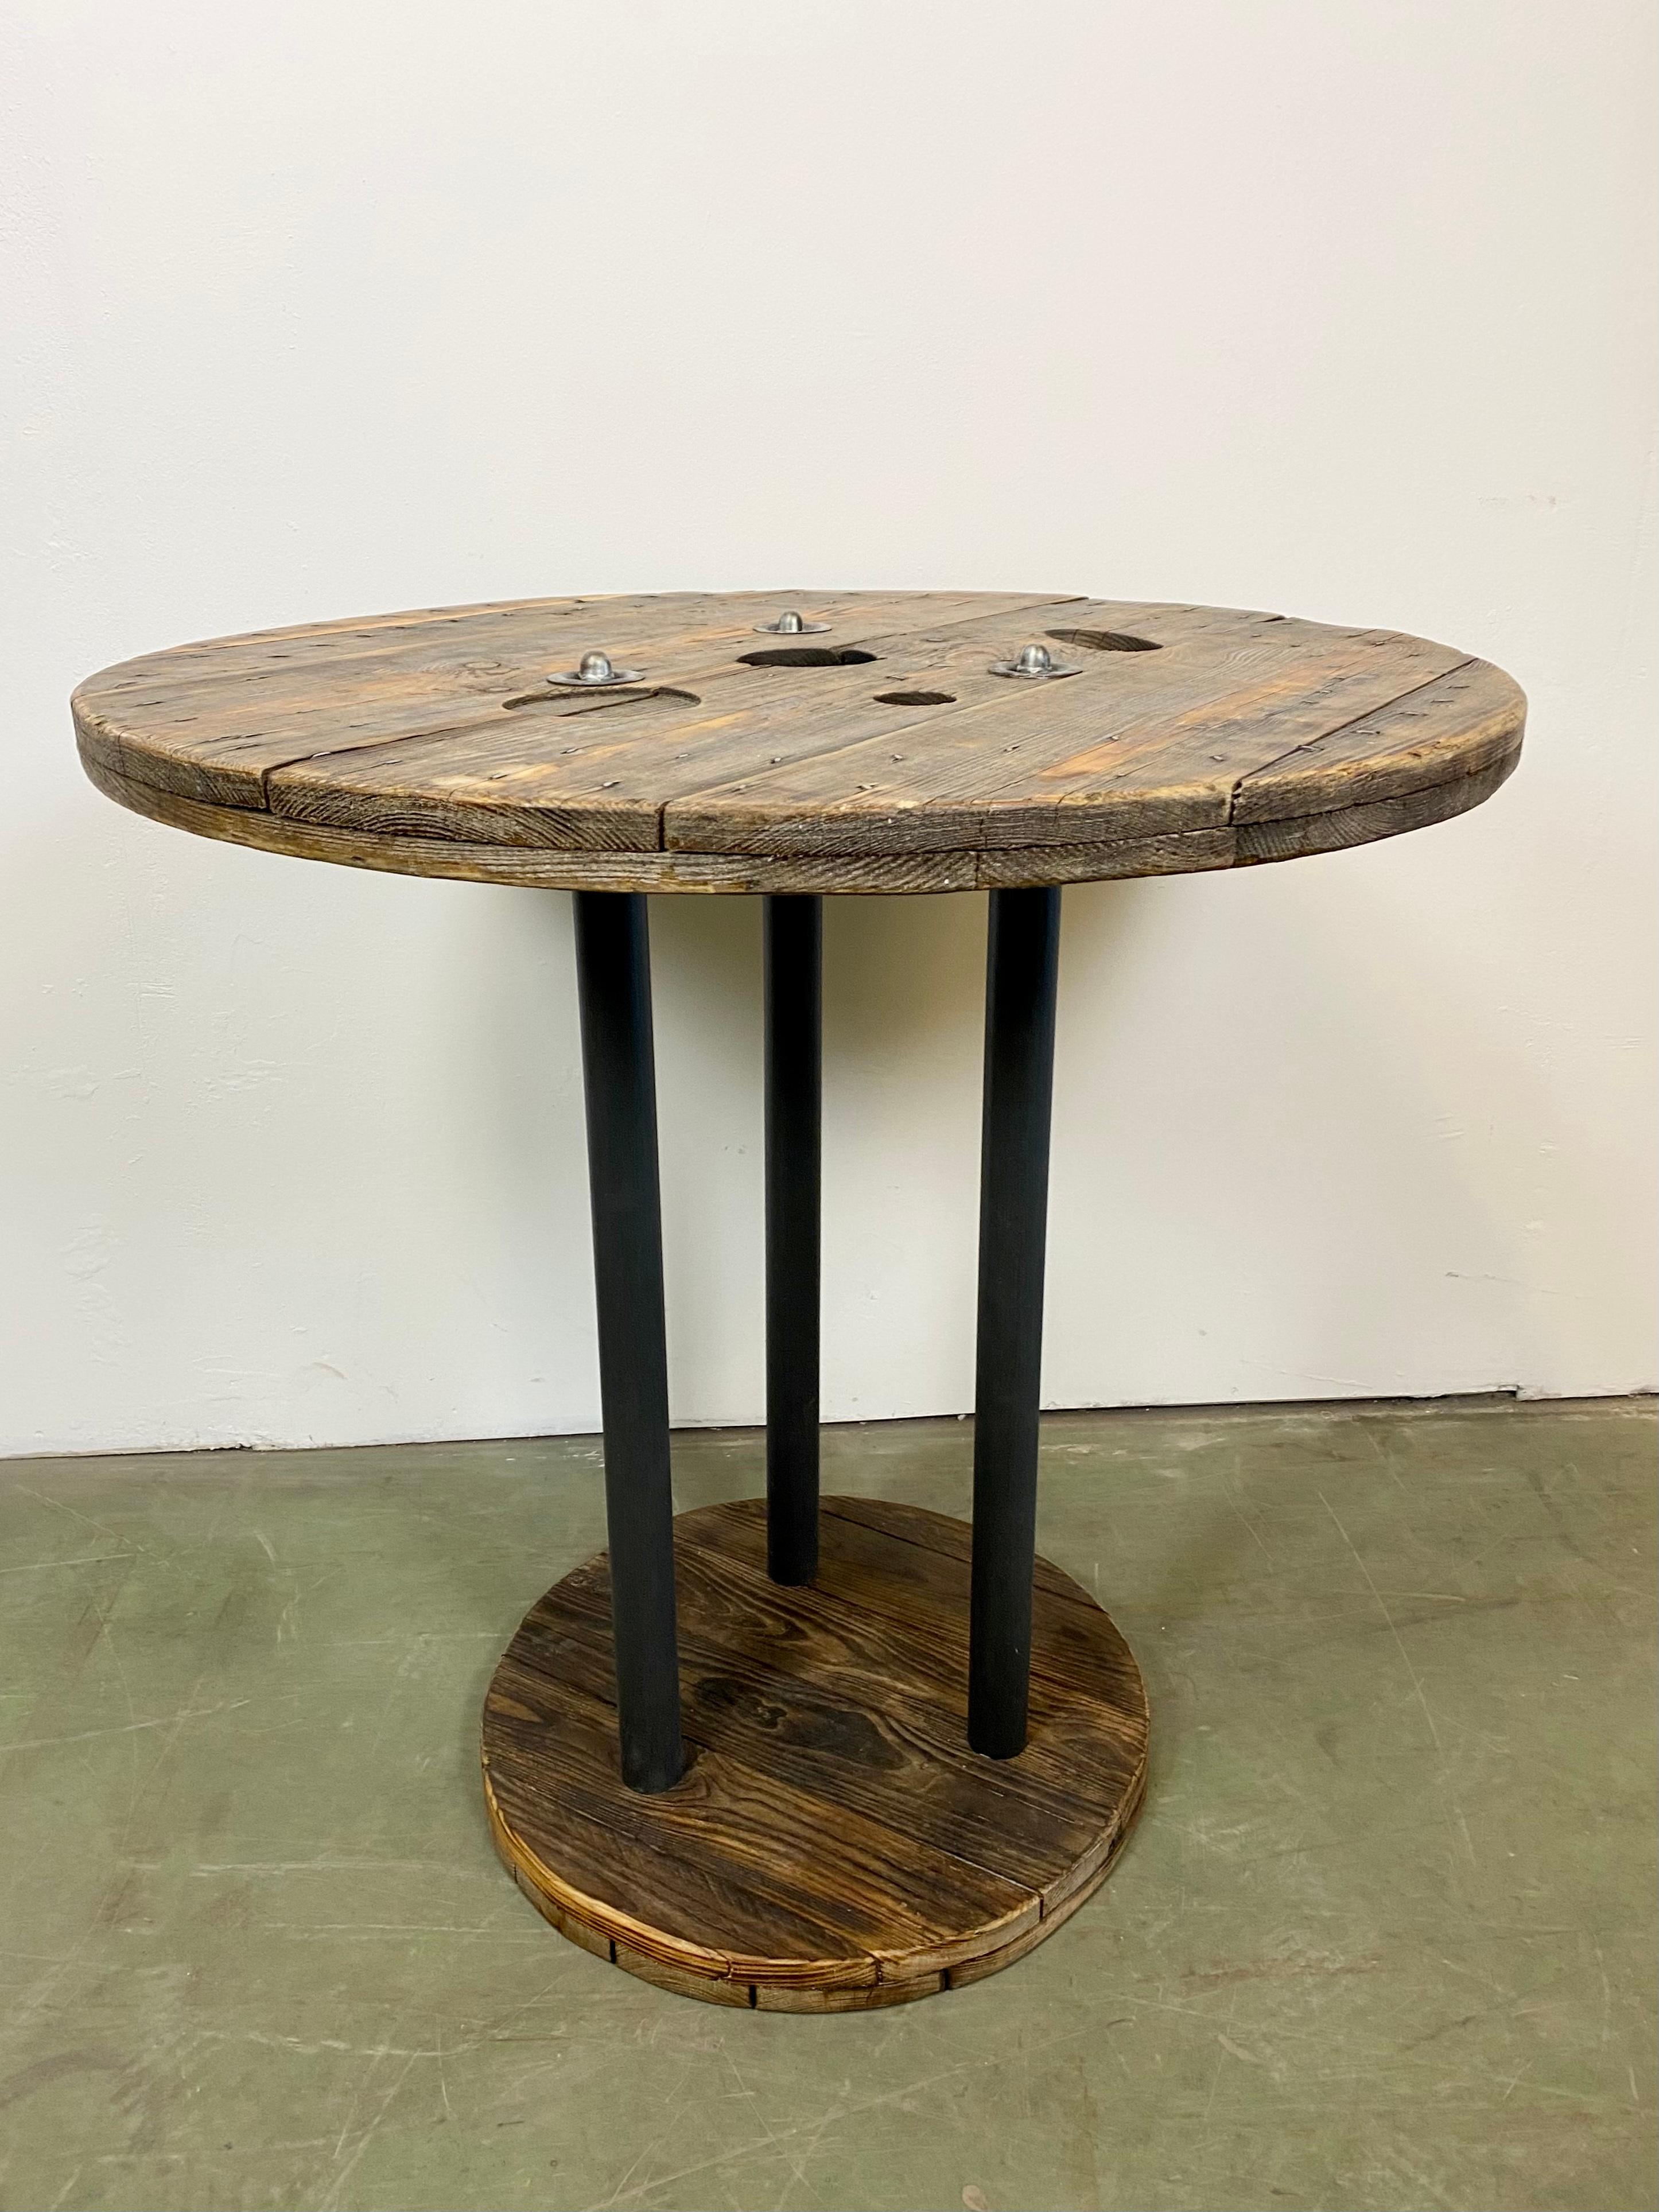 Vintage Industrial circle coffee table from the 1960s. It features black iron legs and a solid wooden plates with very nice patina. Weight: 24 kg.
Additional information:
Diameter of the plates: Upper 80 cm, bottom 50cm
The price for transport is